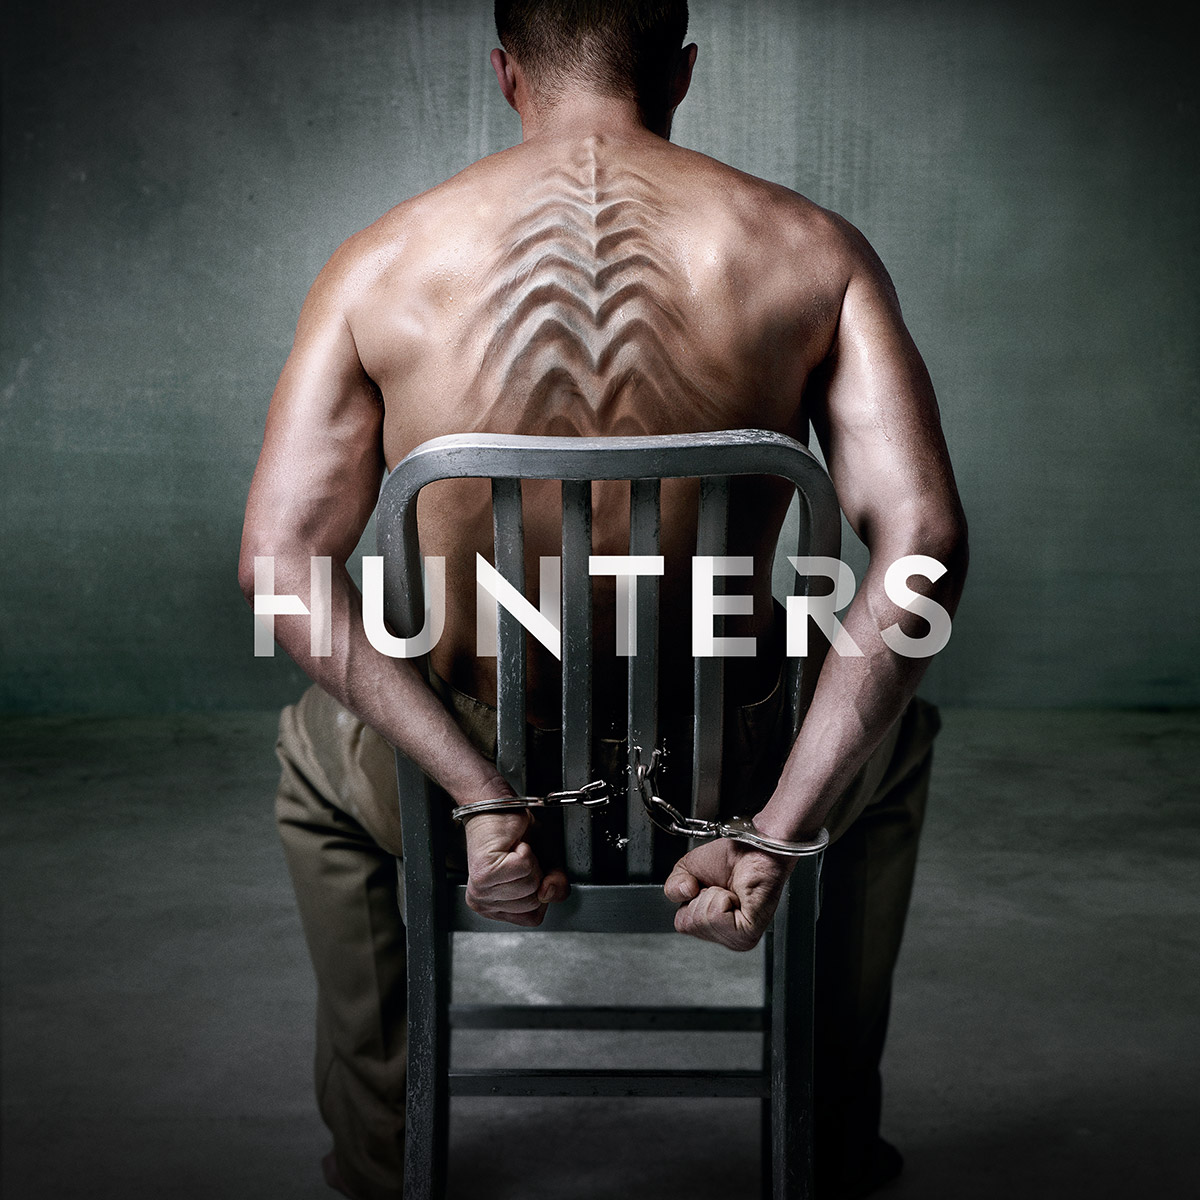 The Hunters Serie